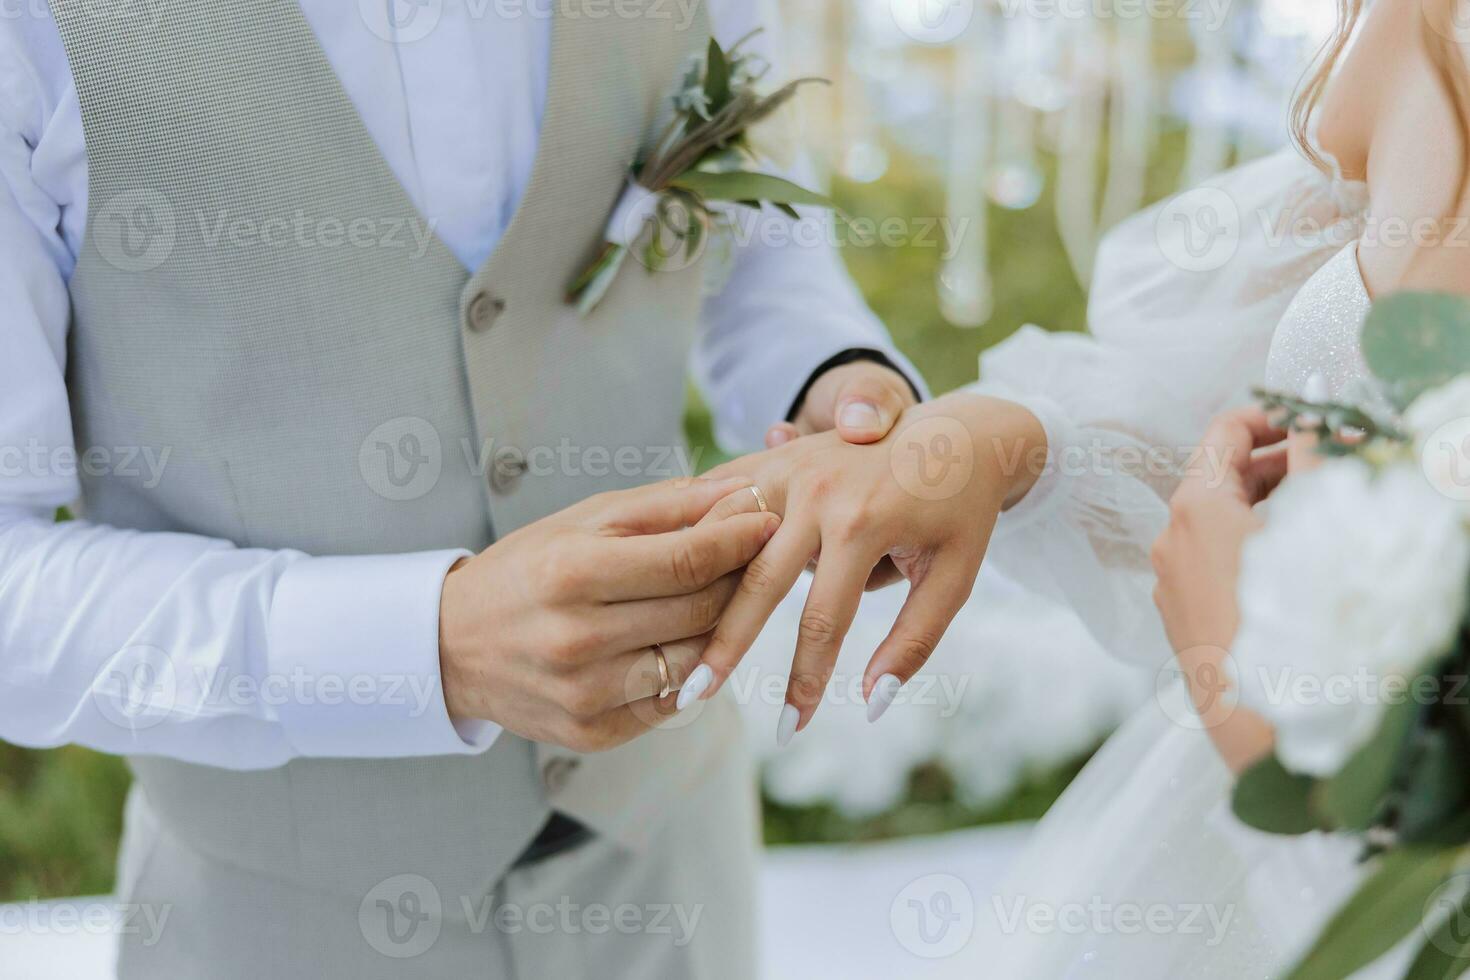 Newlyweds at the wedding ceremony. The groom puts on the bride's wedding ring. High quality photo. Spring wedding photo